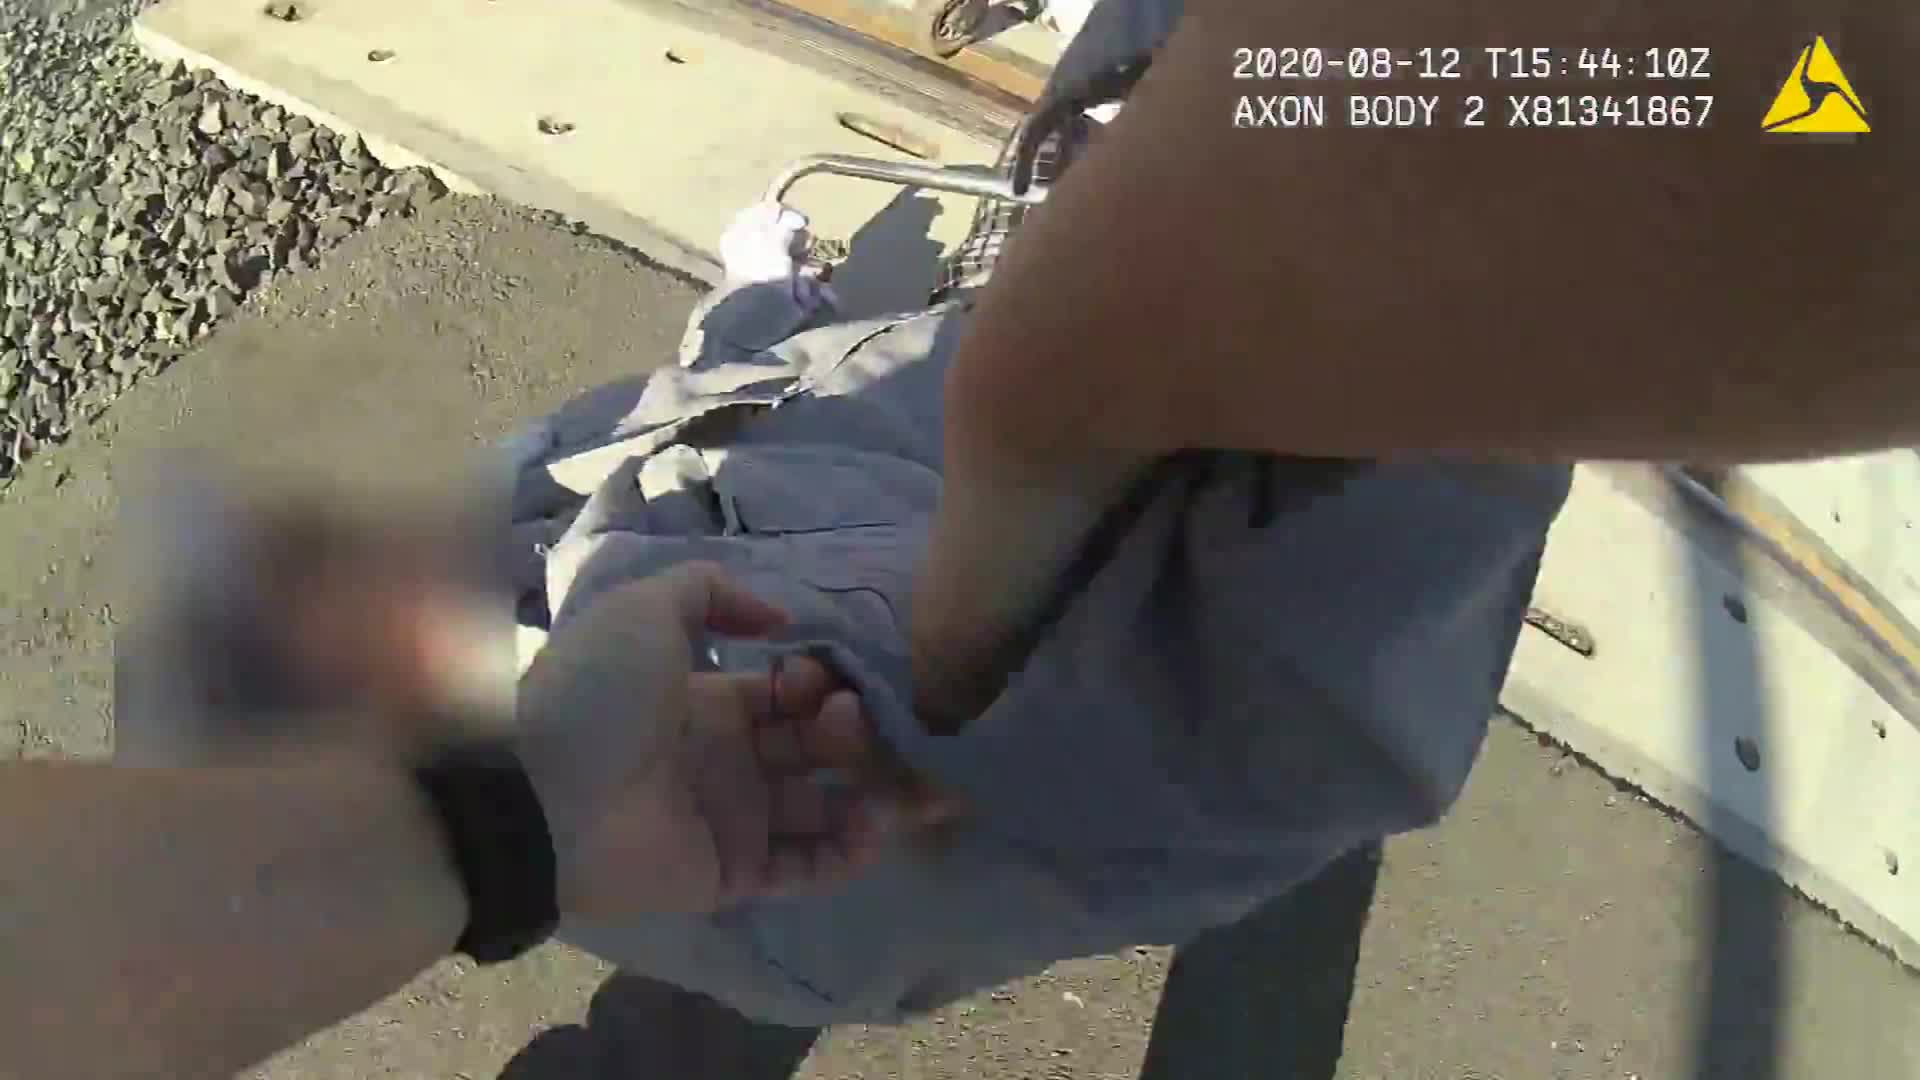 An Officer Saved a Man in a Wheelchair Stuck on Train Tracks. Her Bodycam Video Shows the Rescue